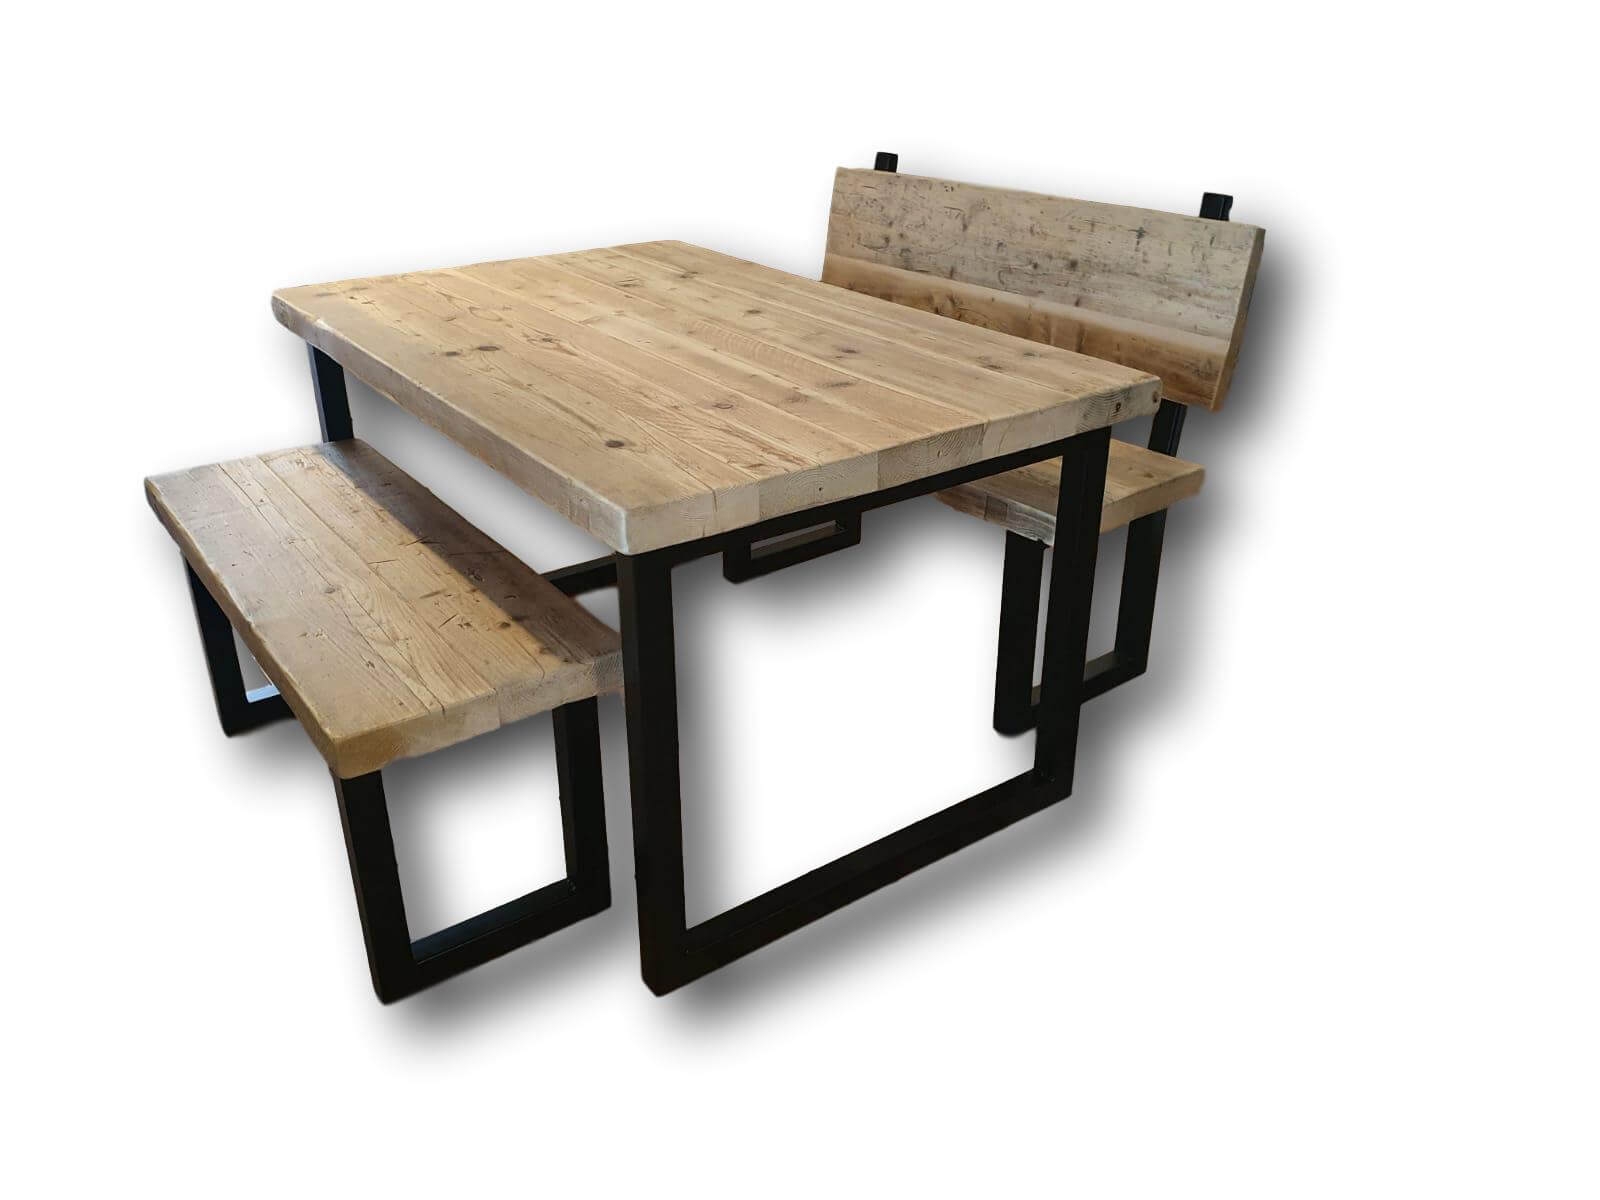 The Reclaimed Rustic Weathered Table – Design Your Own Dining Table 170cm x 90cm1 bench (to fit between table legs) – Acumen Collection